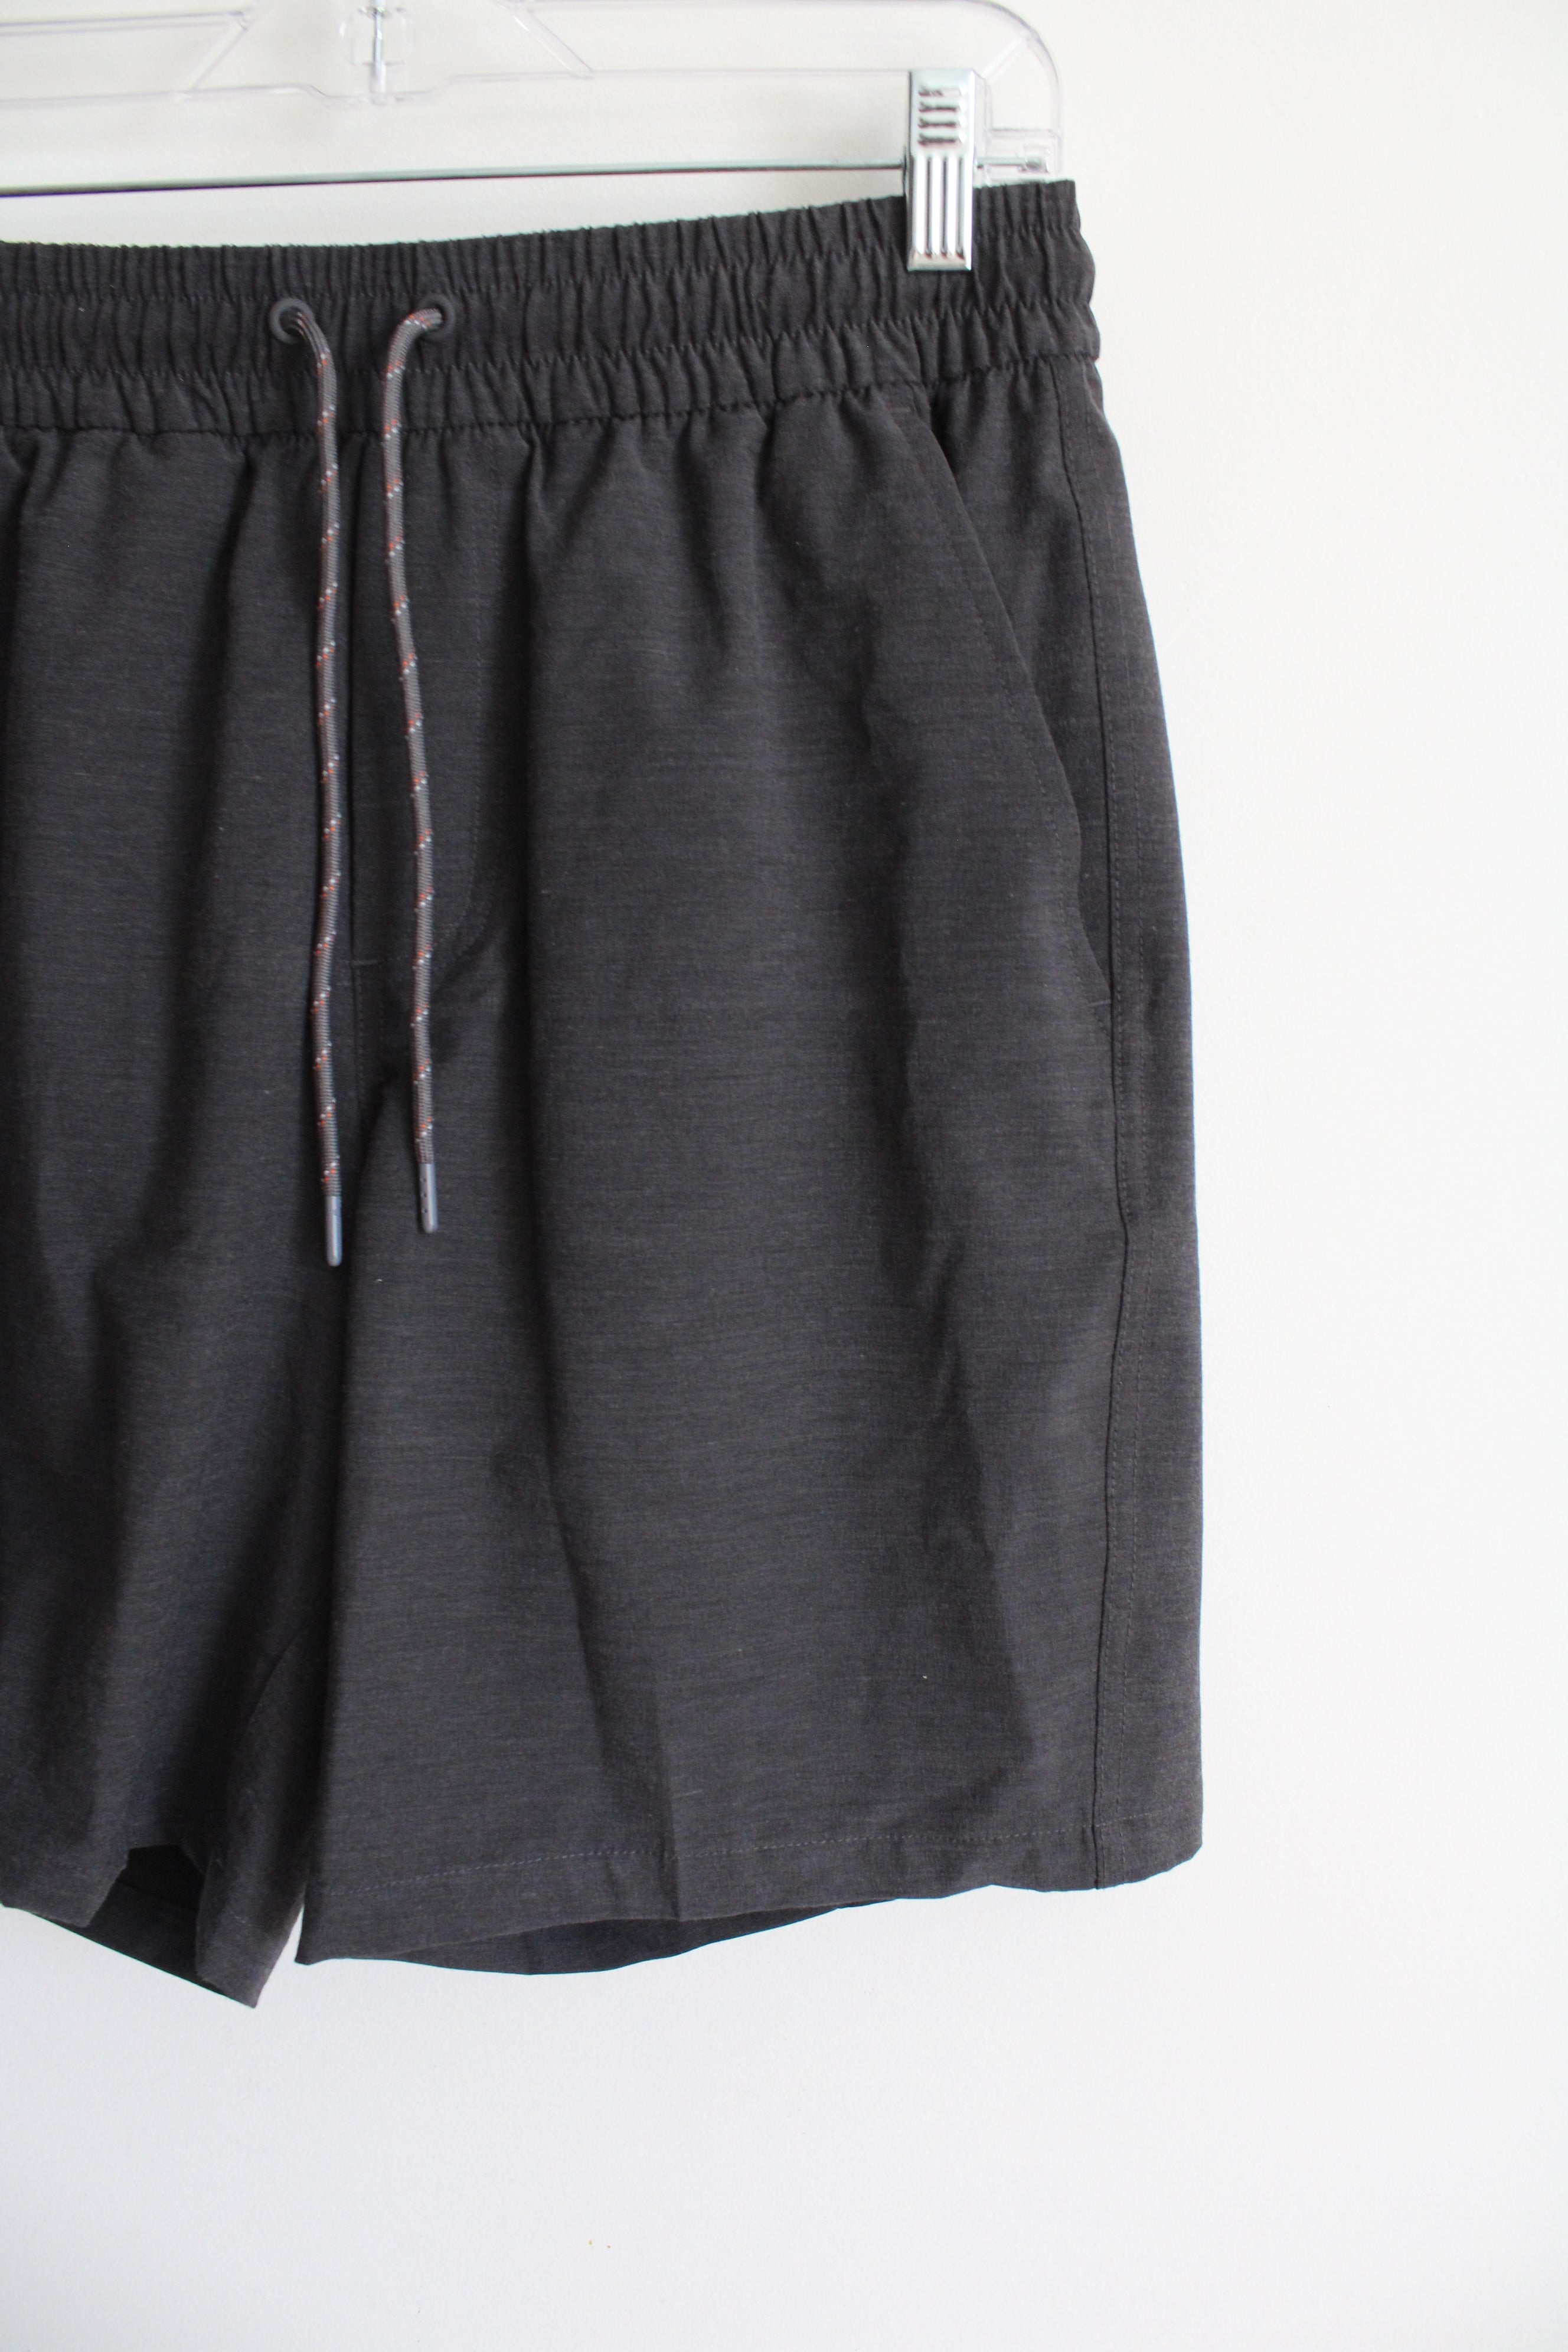 NEW George Gray Stretch Above The Knee Short | S